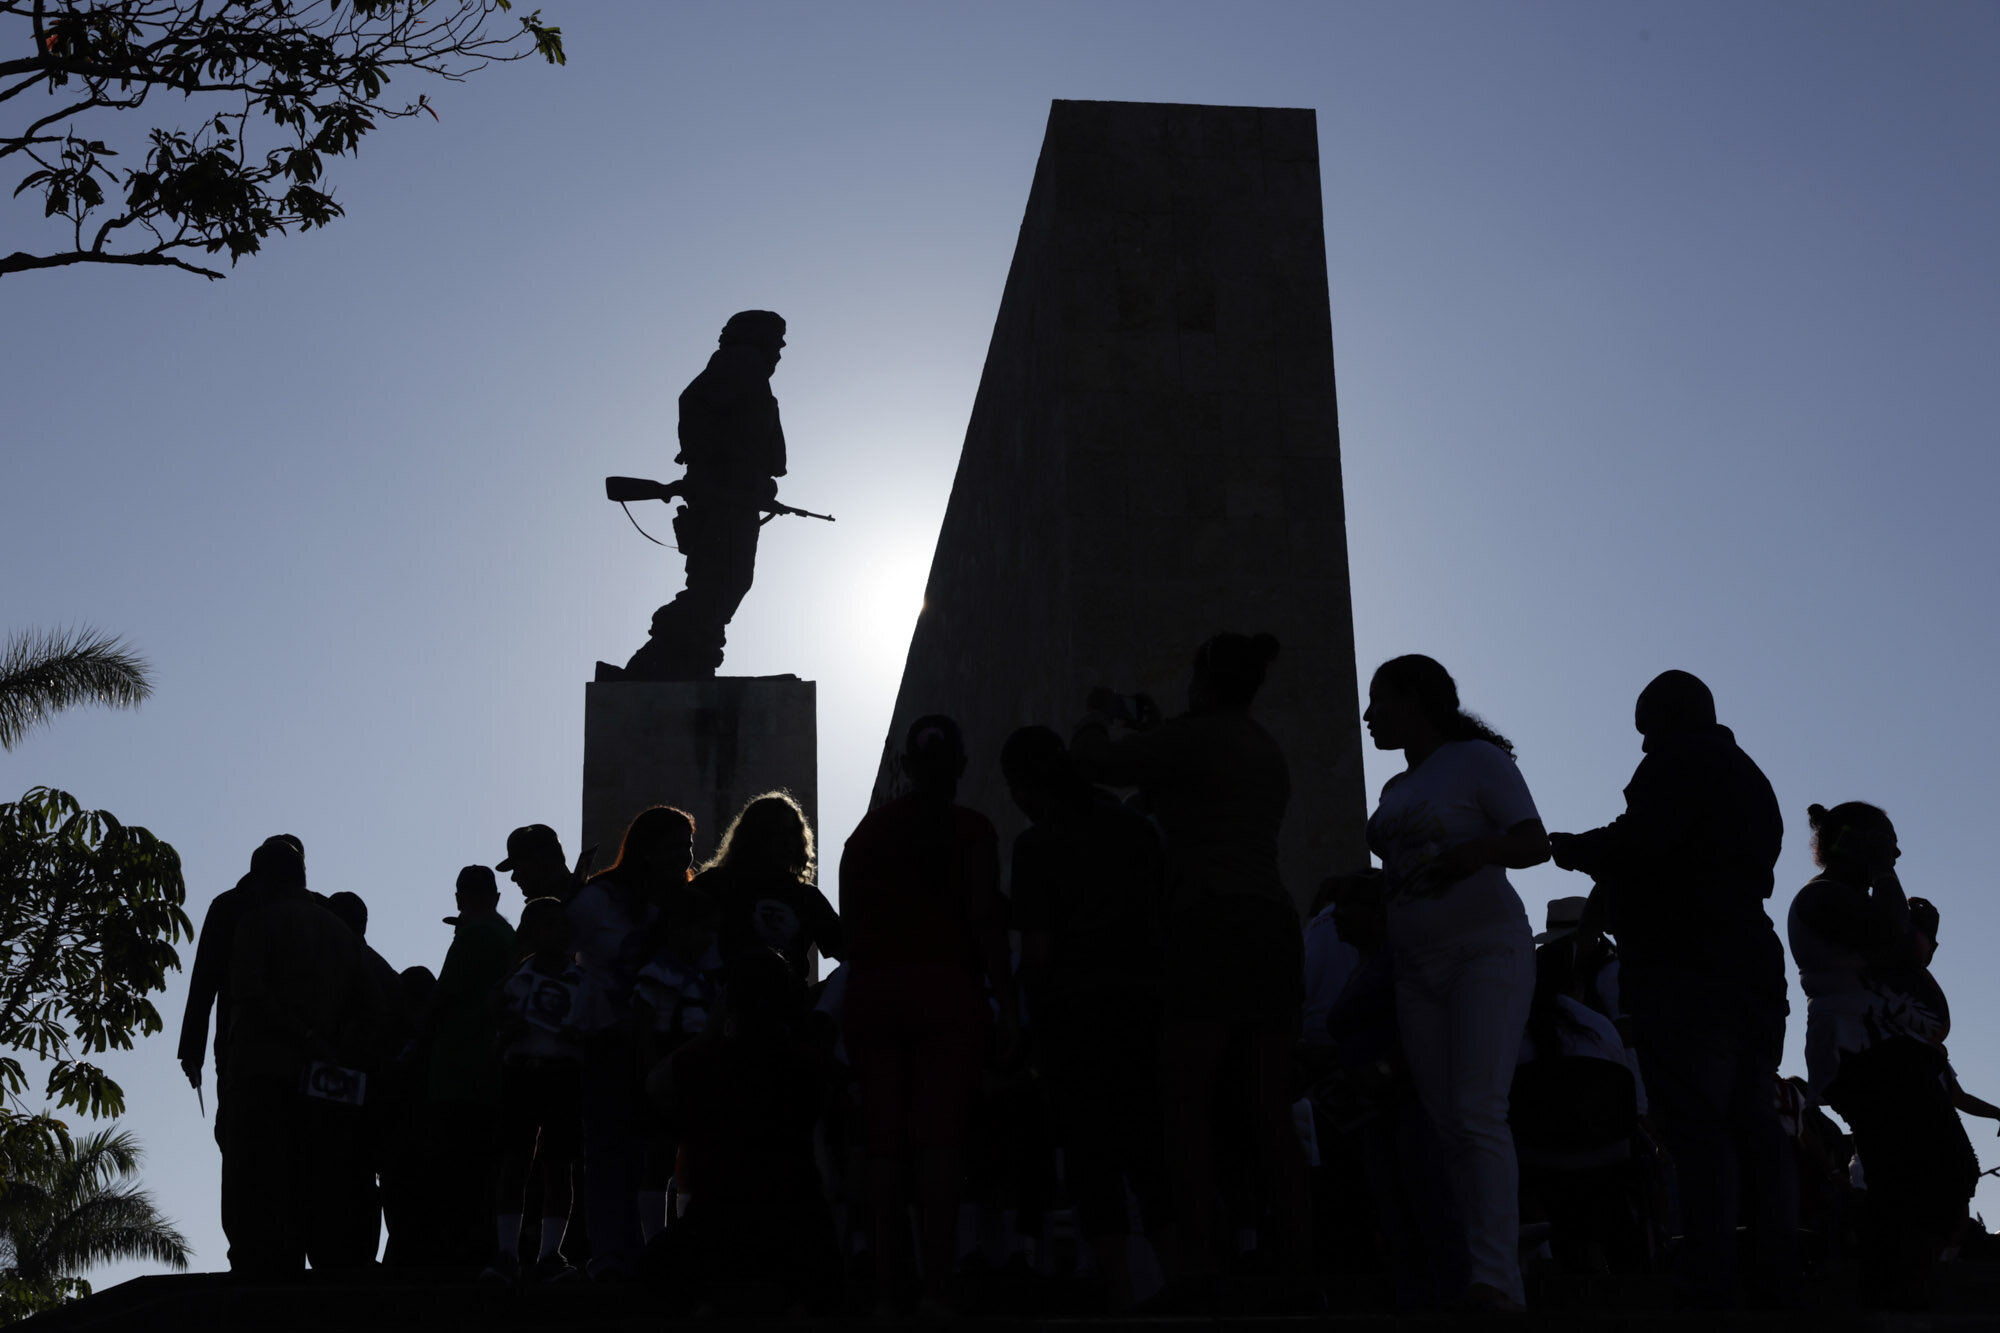  People gather under the statue of Che Guevara after the end of a political act at the Plaza de la Revolucion to celebrate the 50th anniversary of the death of Ernesto Che Guevara, on October 8, 2017 in Santa Clara, Cuba.   